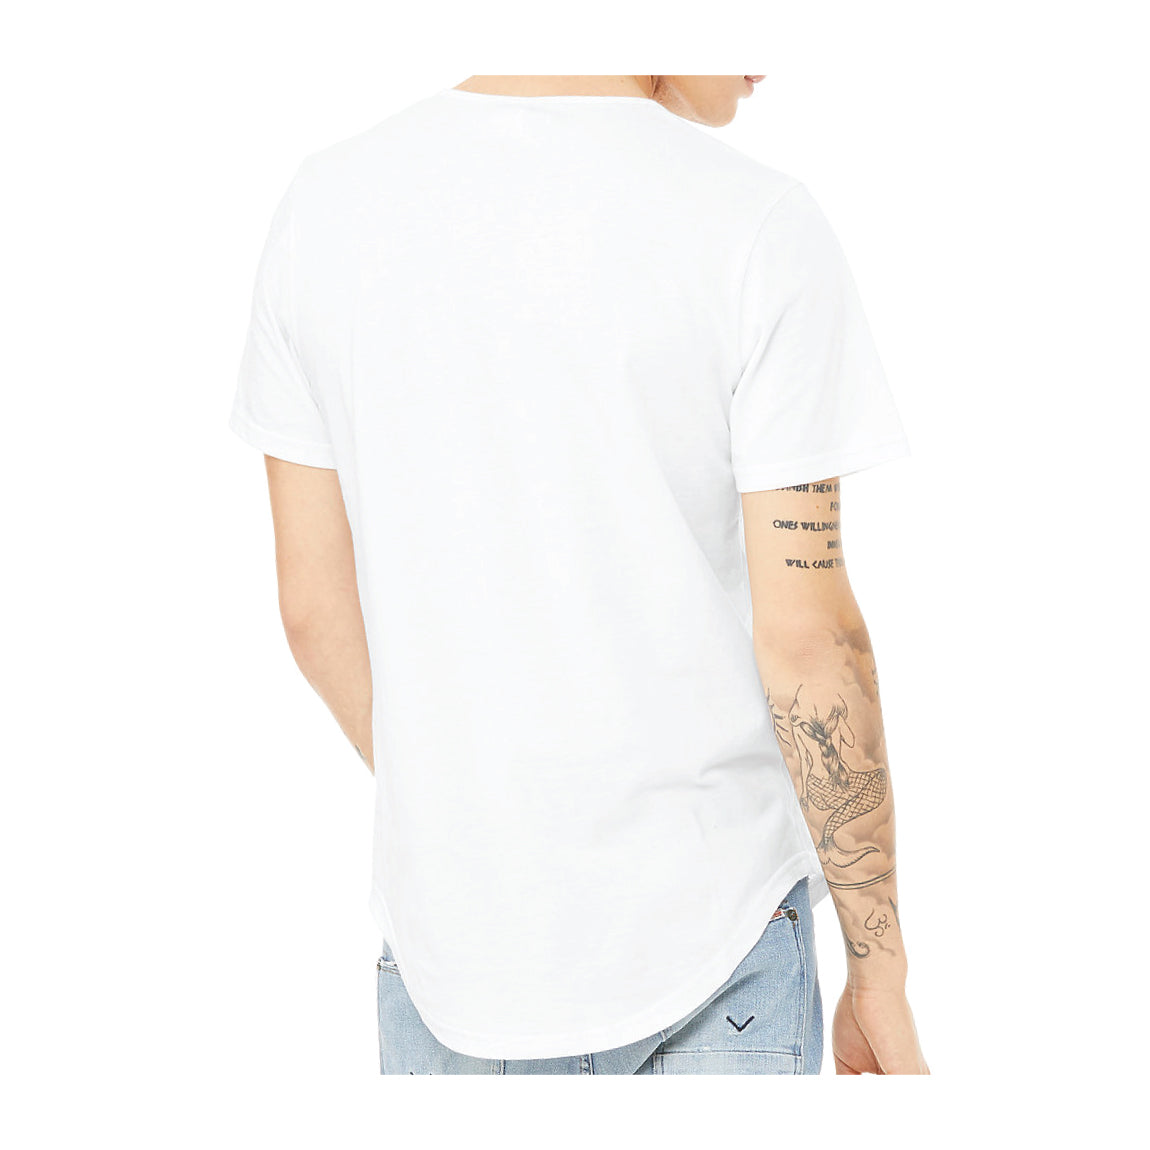 Mens Jersey Short Sleeve Tee With Curved Hem